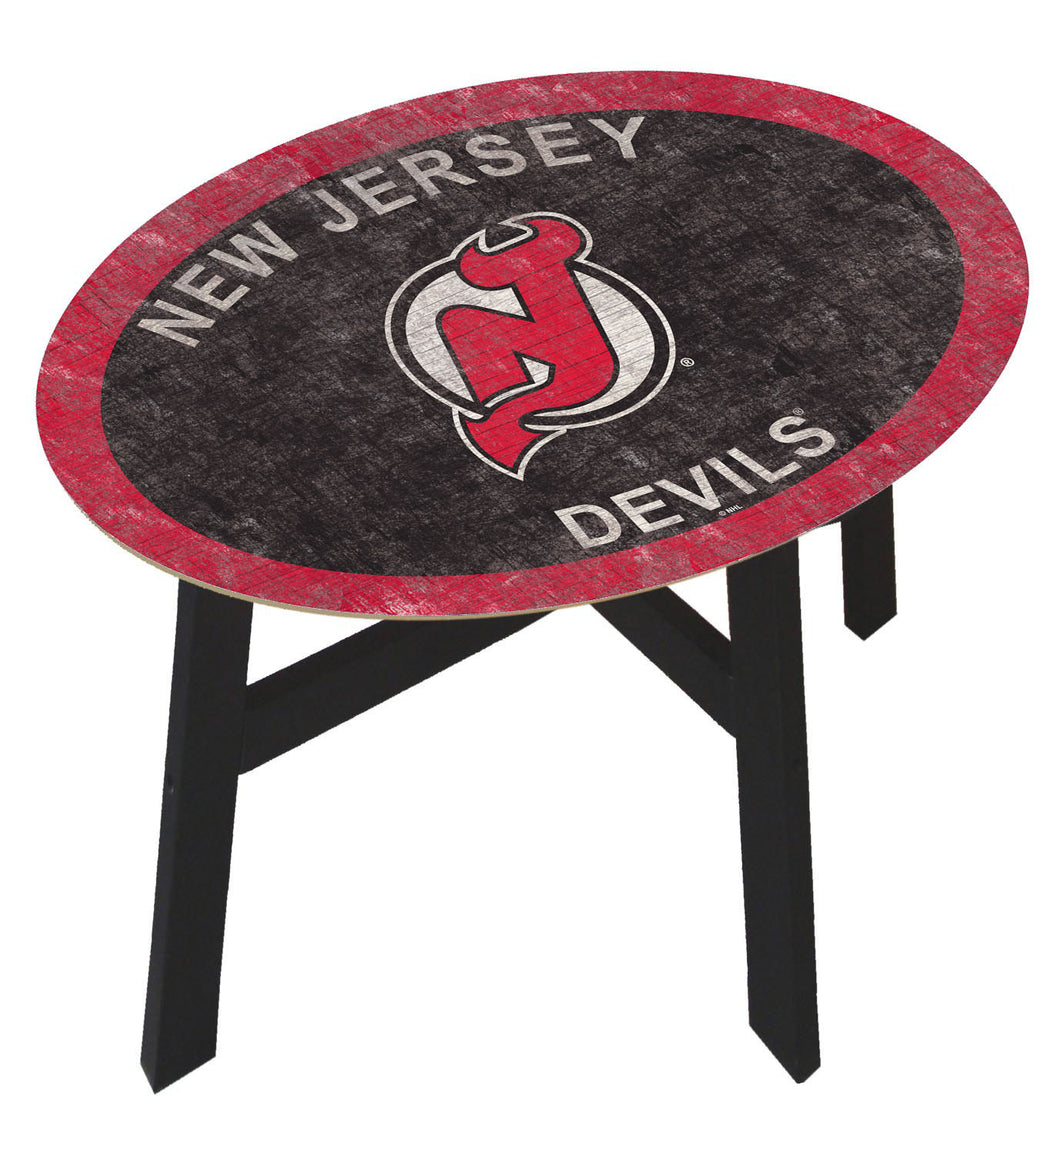 Group Seating  New Jersey Devils